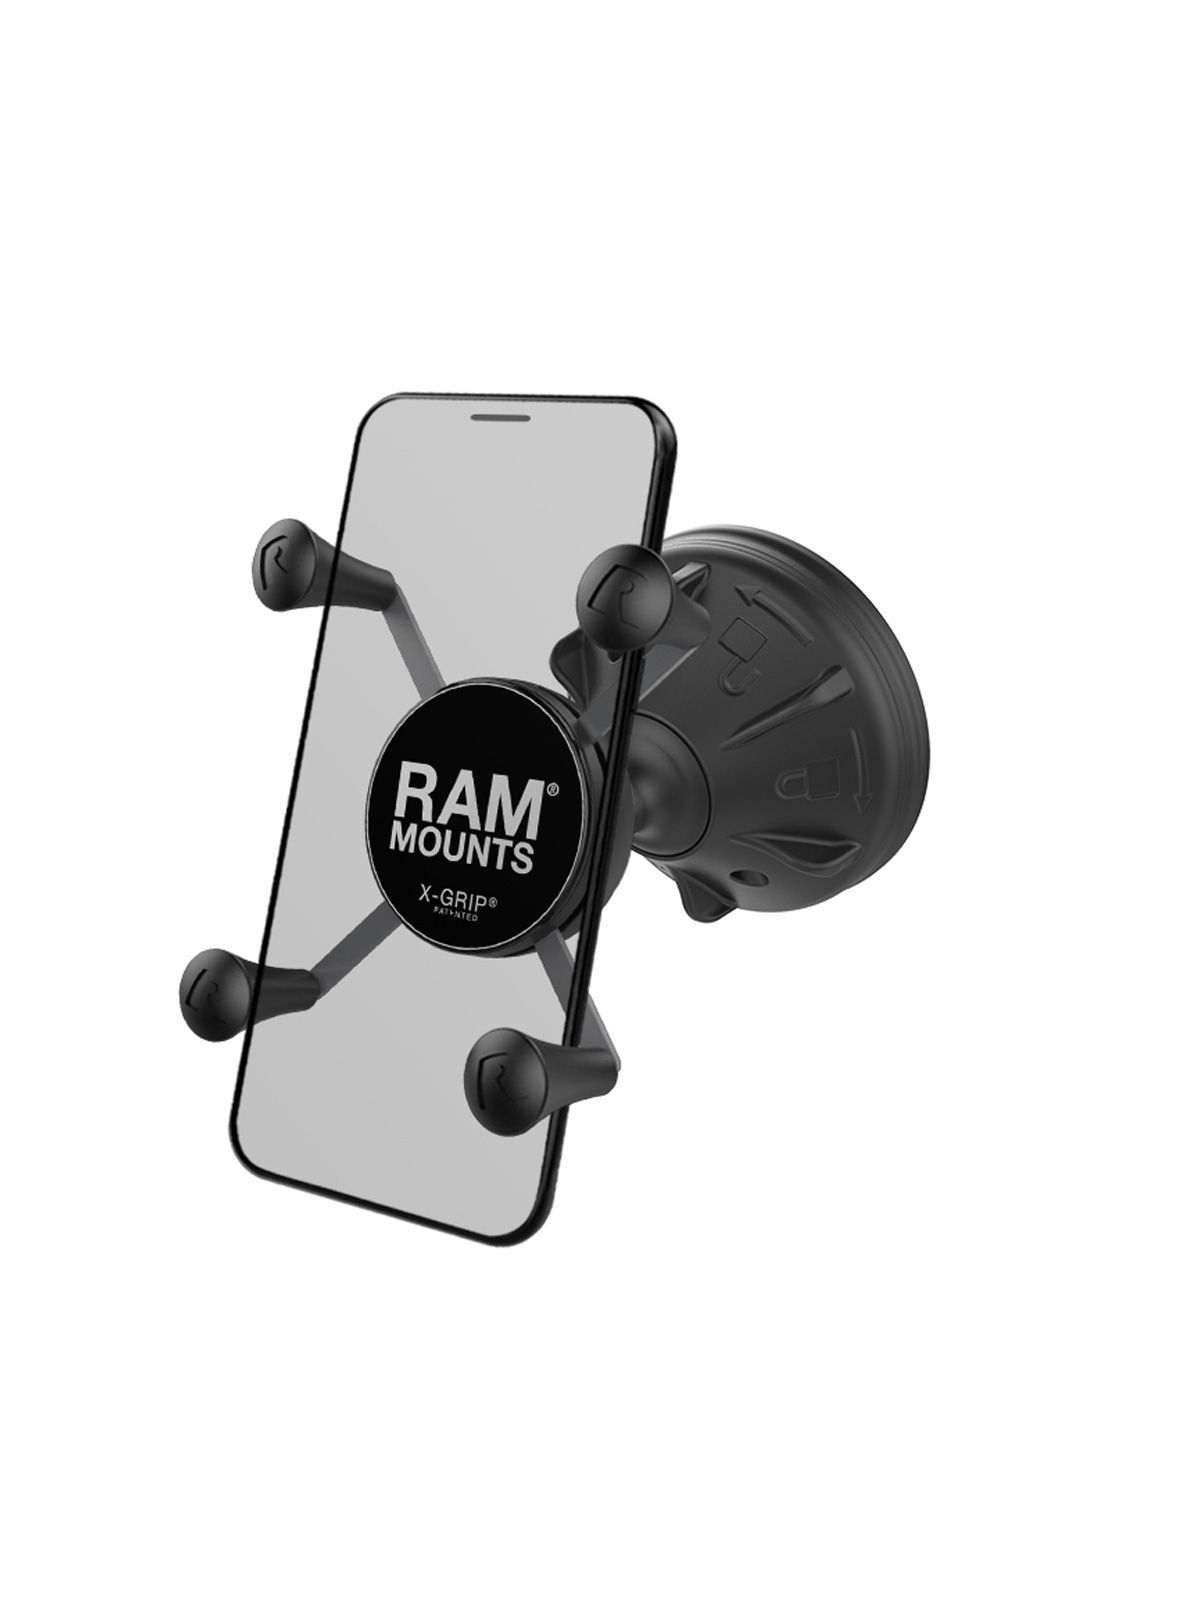 RAM MOUNTS Mighty-Buddy Snap Link Suction Cup Mount with Universal X-Grip Holder